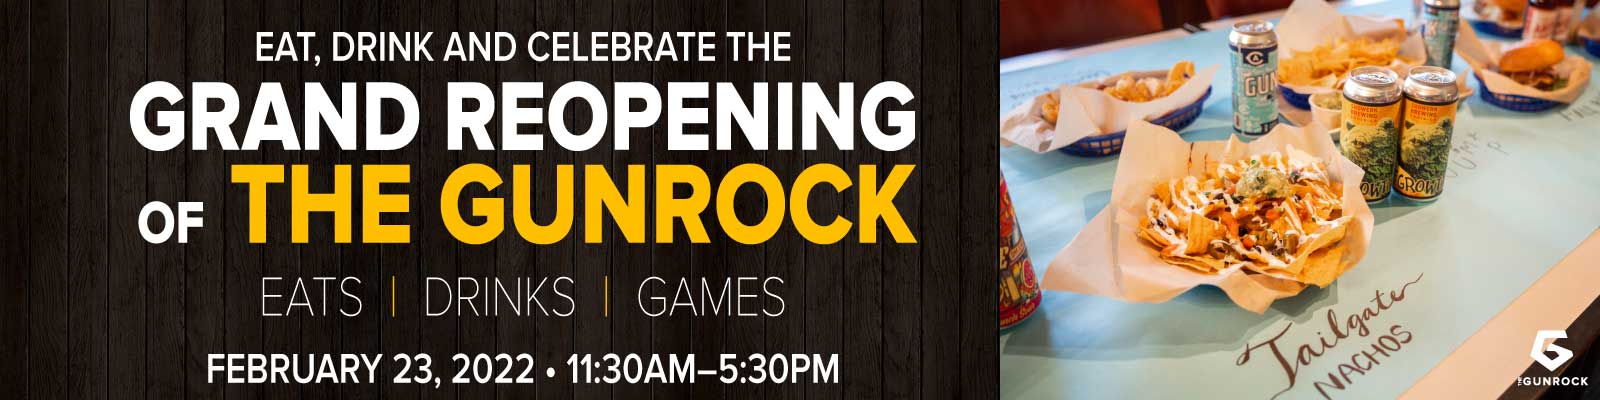 Eat, drink and celebrate the Grand Reopening of The Gunrock. Eats, drinks and games. February 23, 2022, 11:30 am-5:30 pm